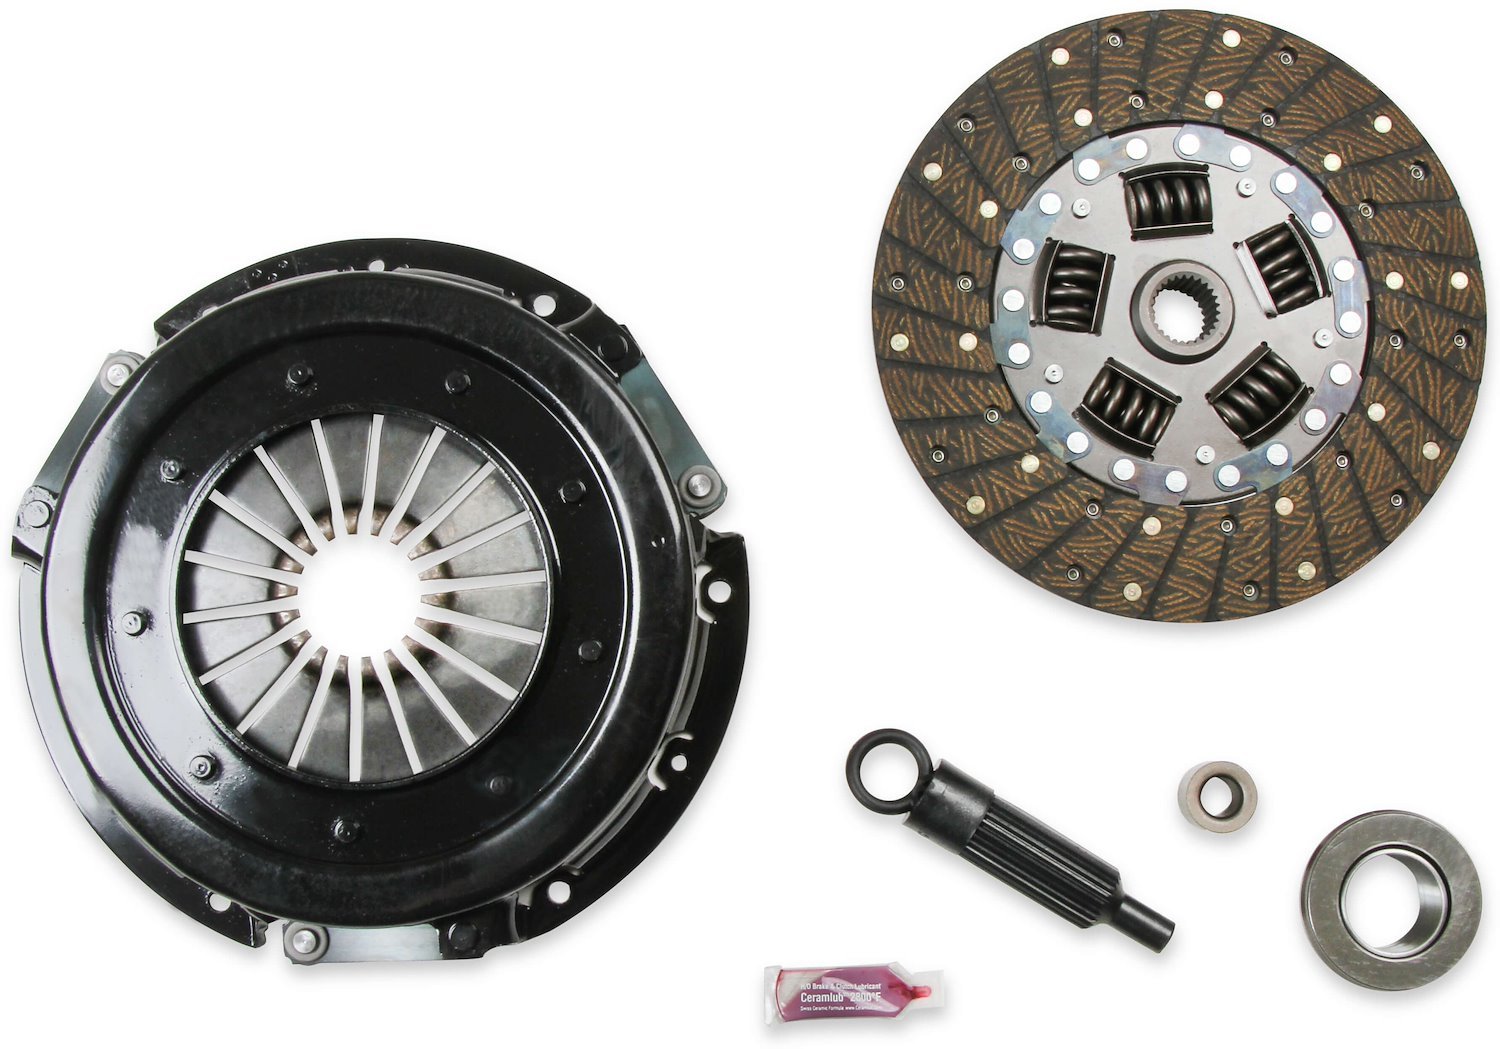 Street 450 Clutch Conversion Kit 1986-2000 Ford Mustang